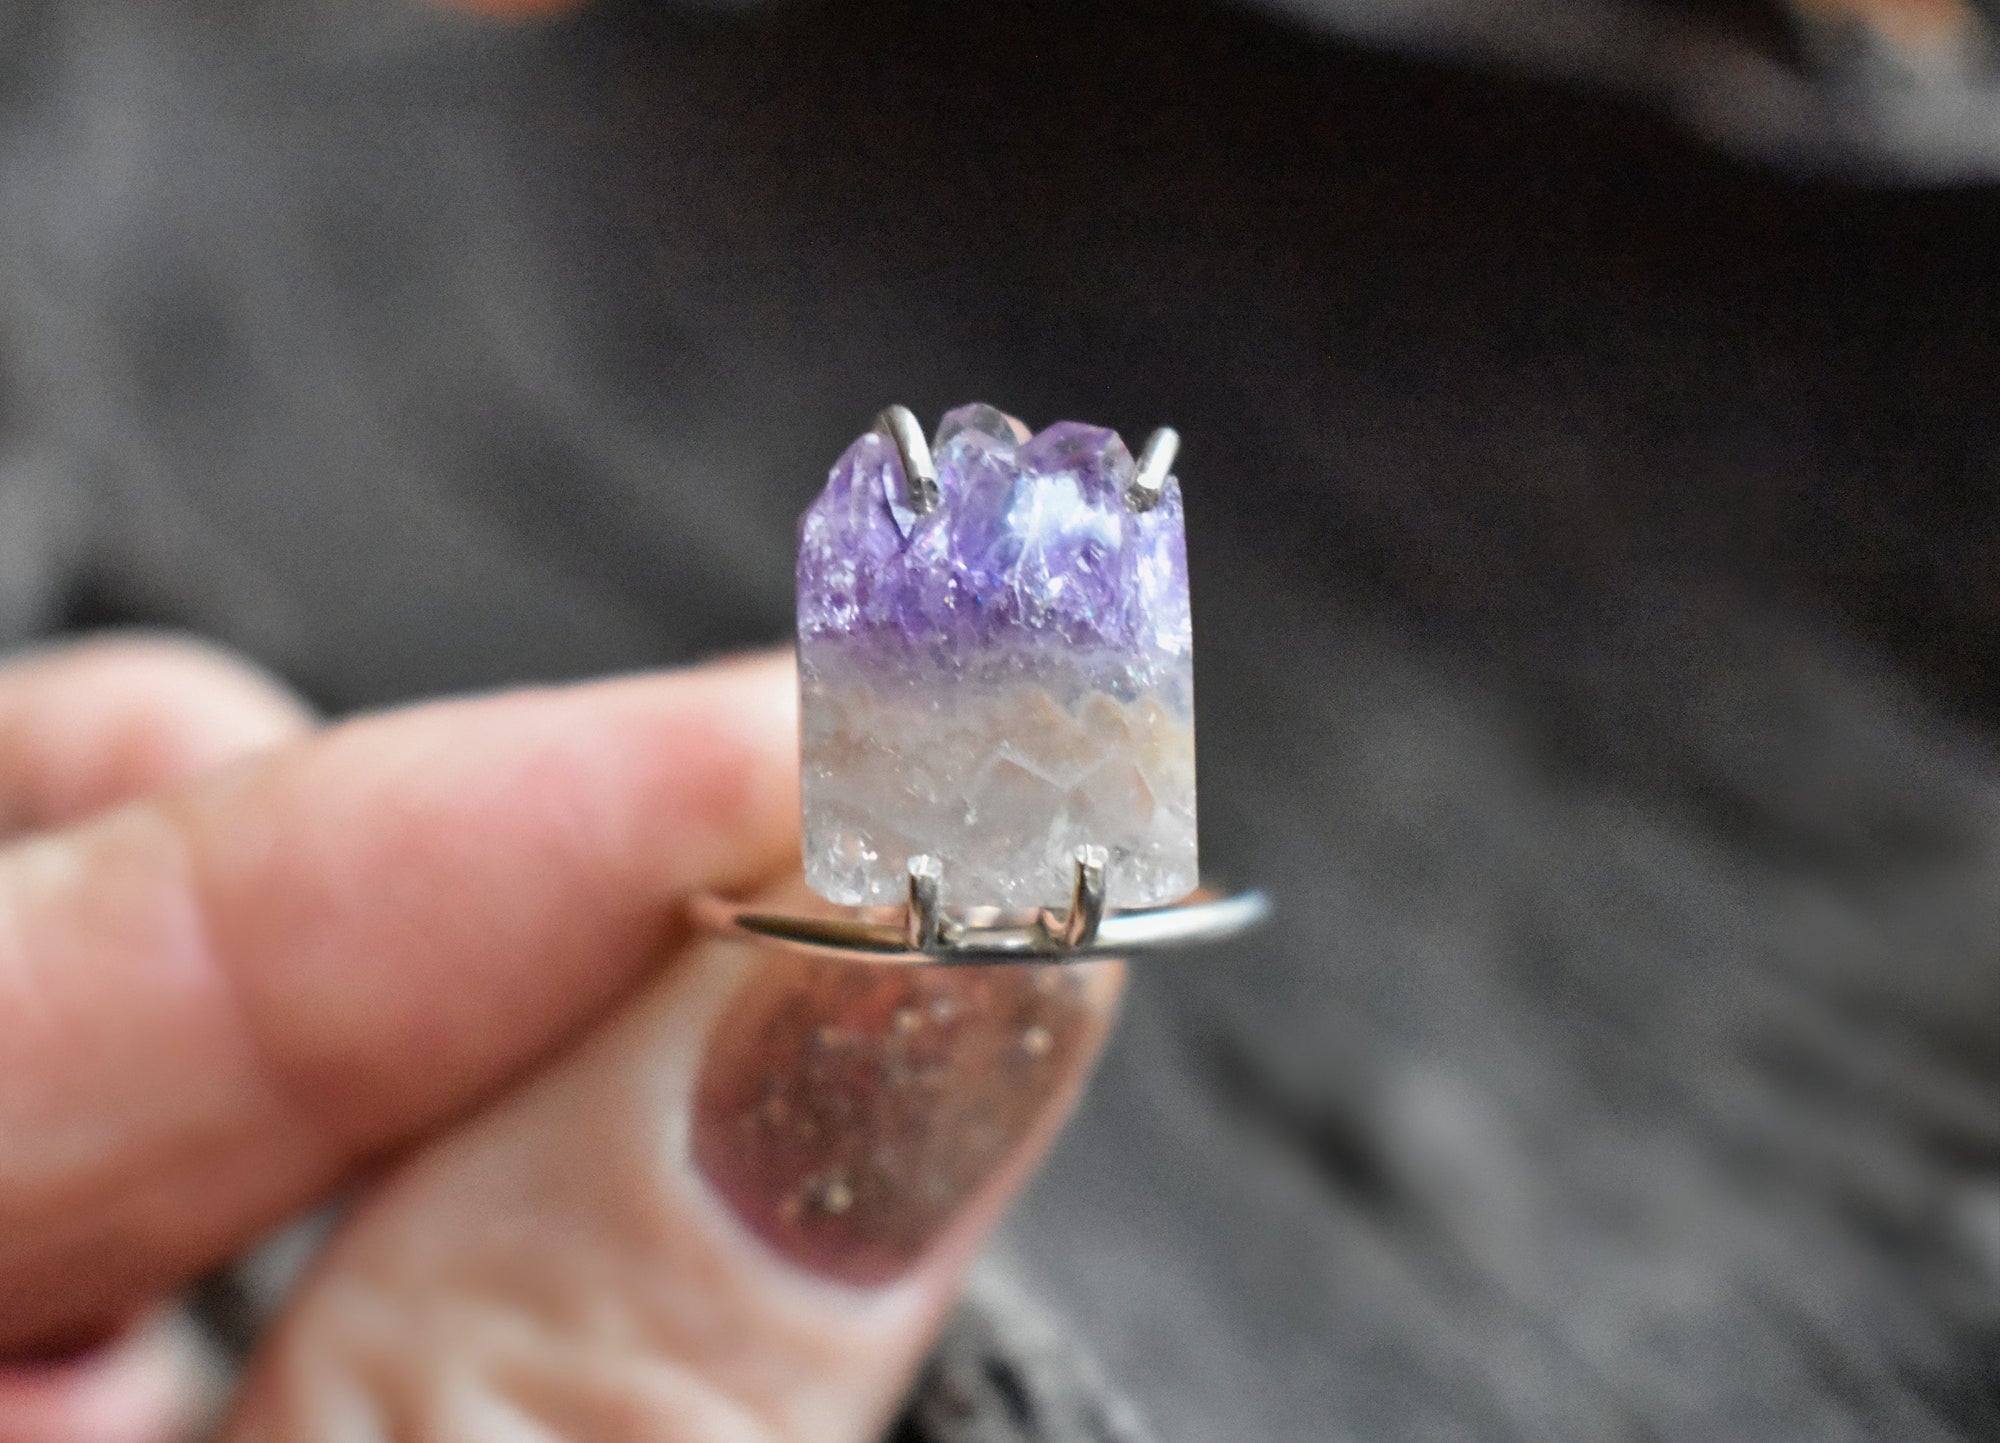 Luxury Statement Ring for Her, A Stunning Amethyst in my Offset Fine Silver Ring with Prong Setting, The Most Unique Jewelry Gift for Women